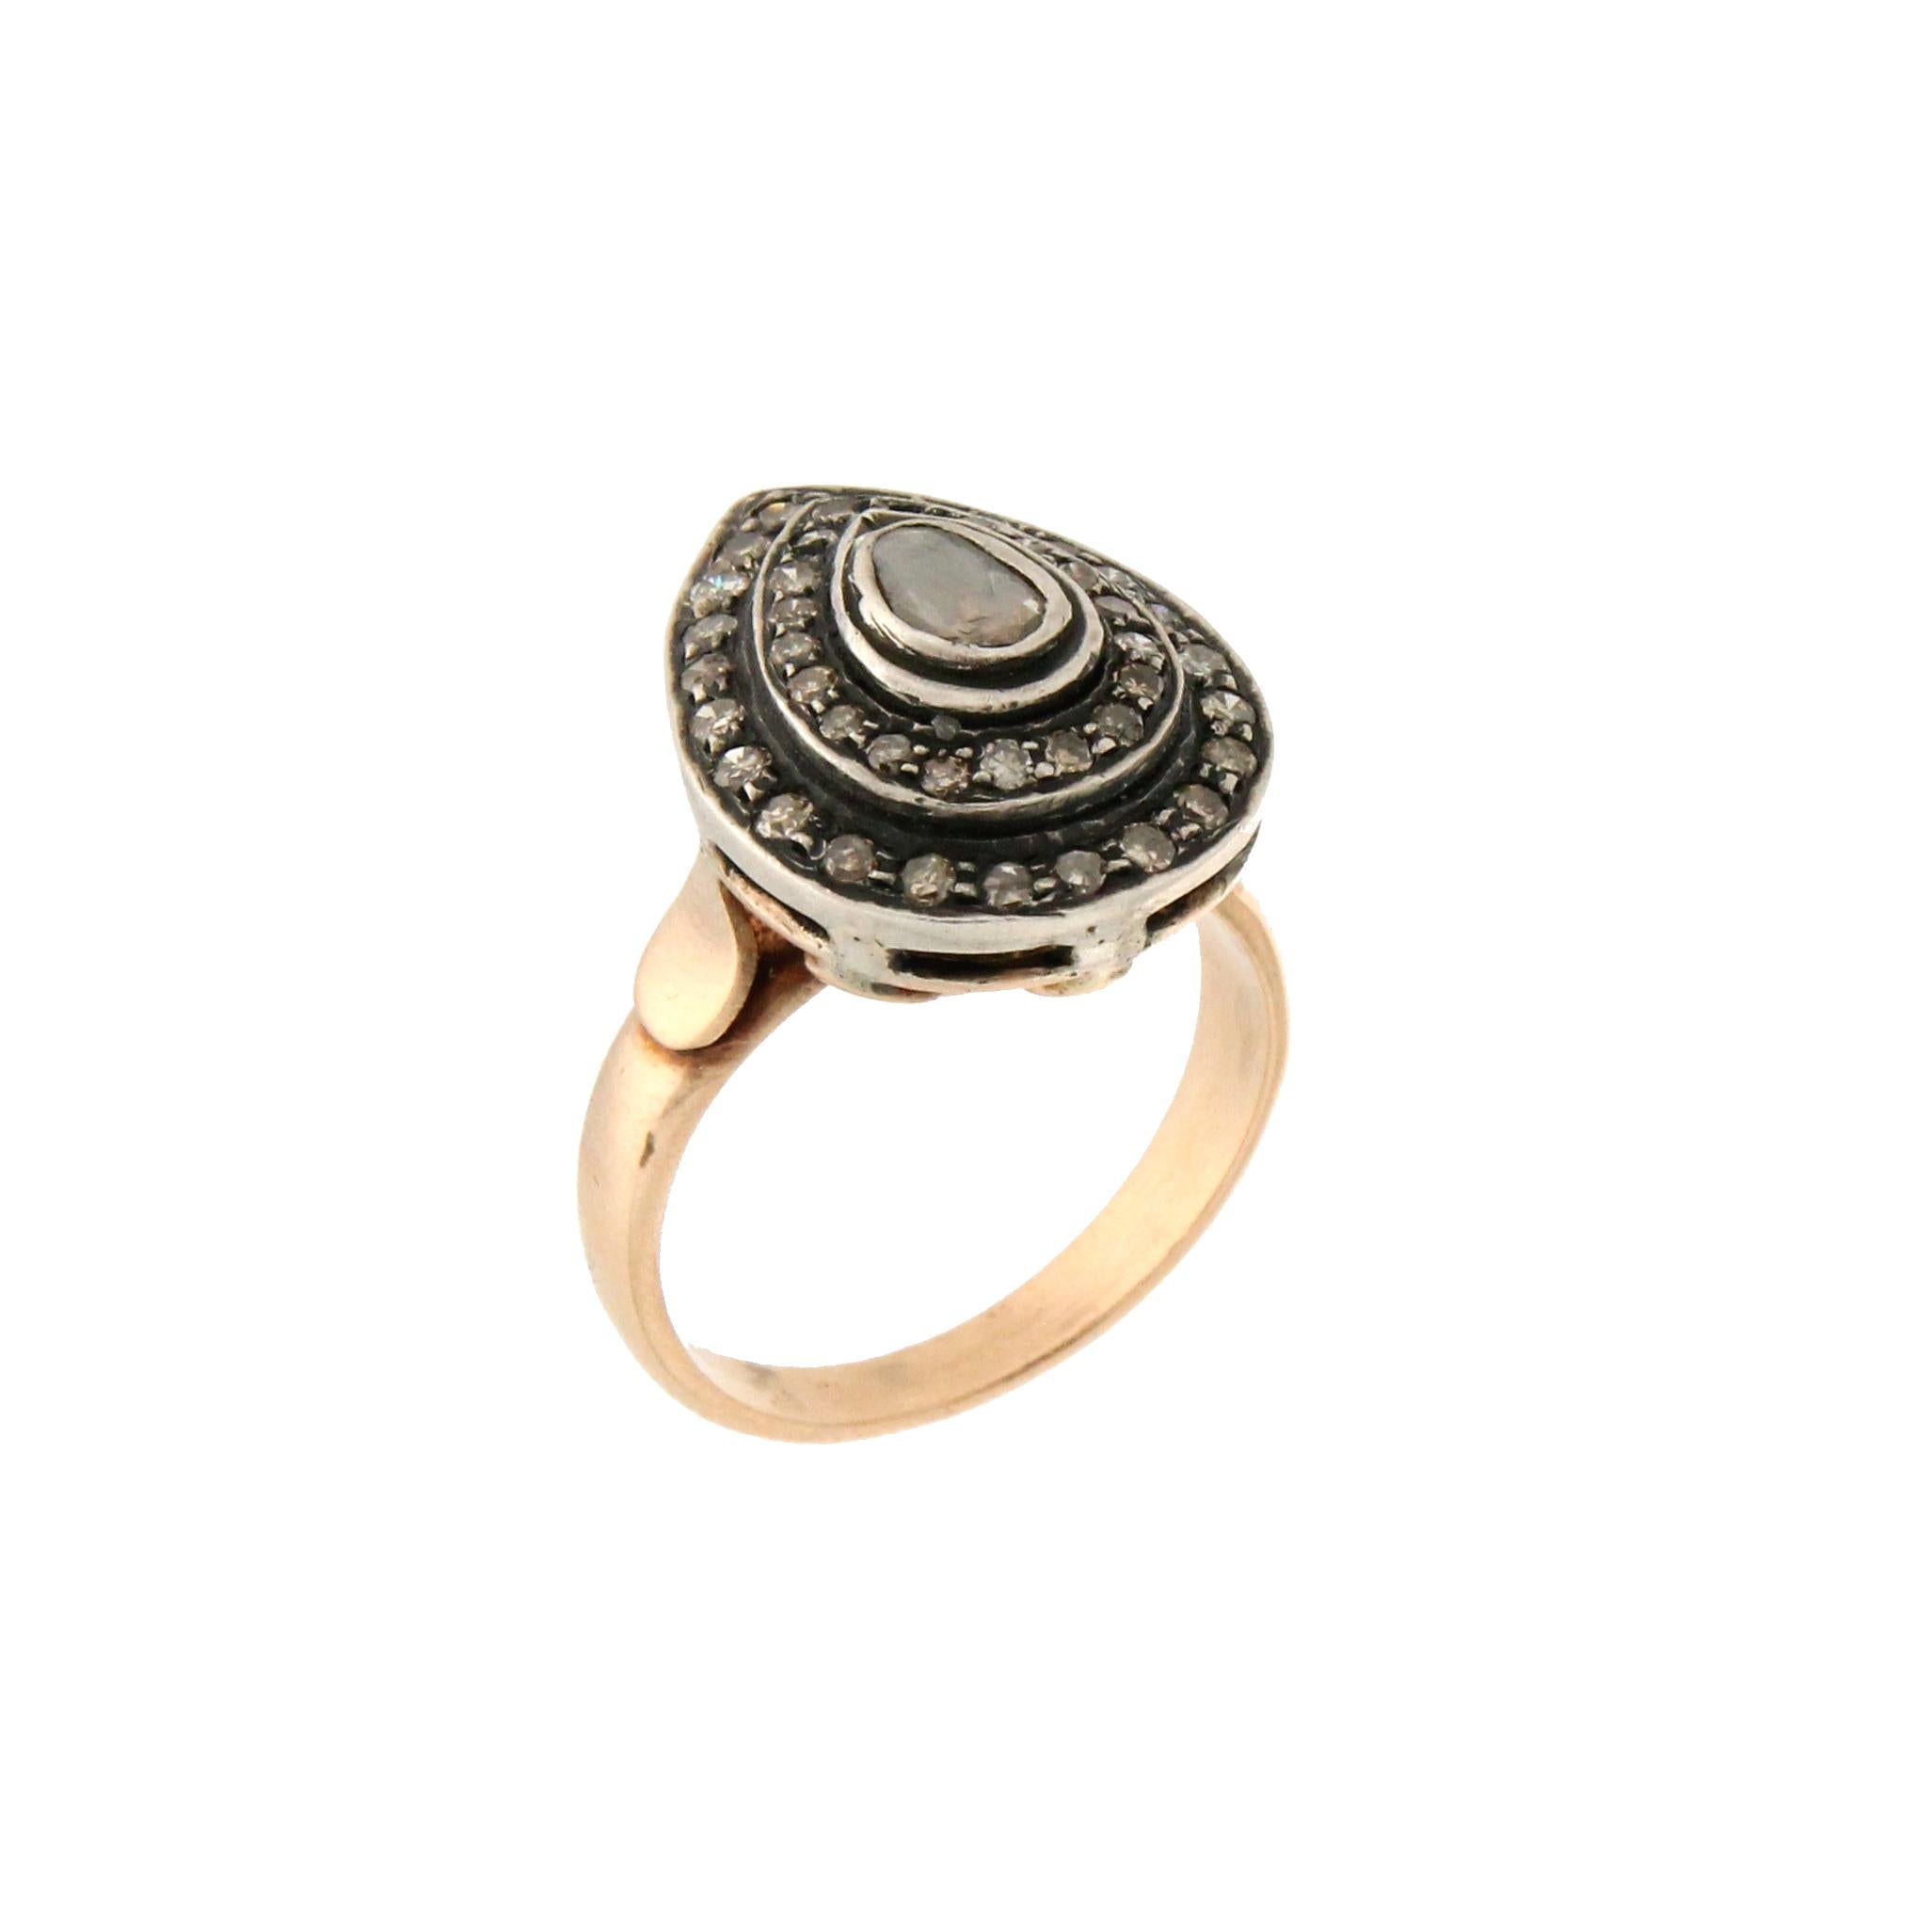 Artisan Handcraft 14 Karat Yellow Gold and Silver Diamonds Cocktail Ring For Sale